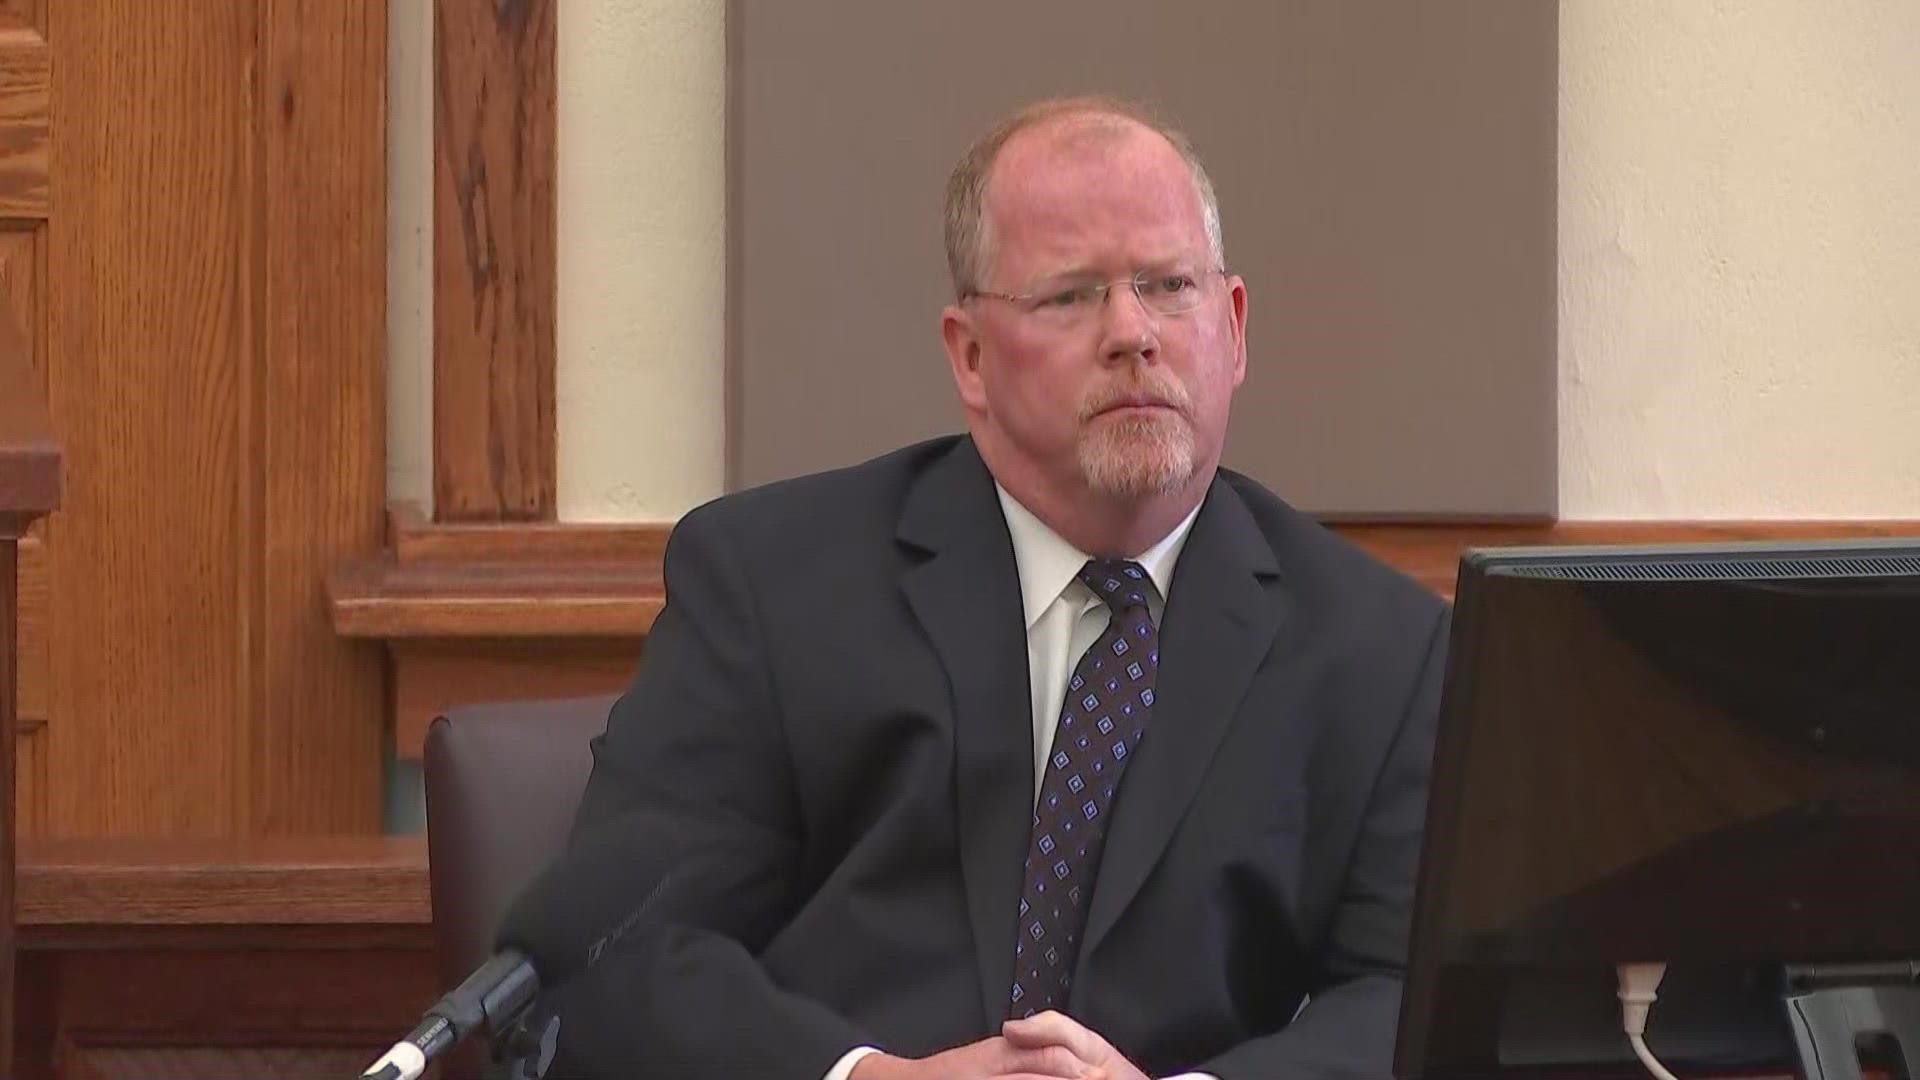 Capt. Heath Dykes, with whom Tara Grinstead had an affair, took the stand and testified about their relationship. He also listened to voicemails he left her.